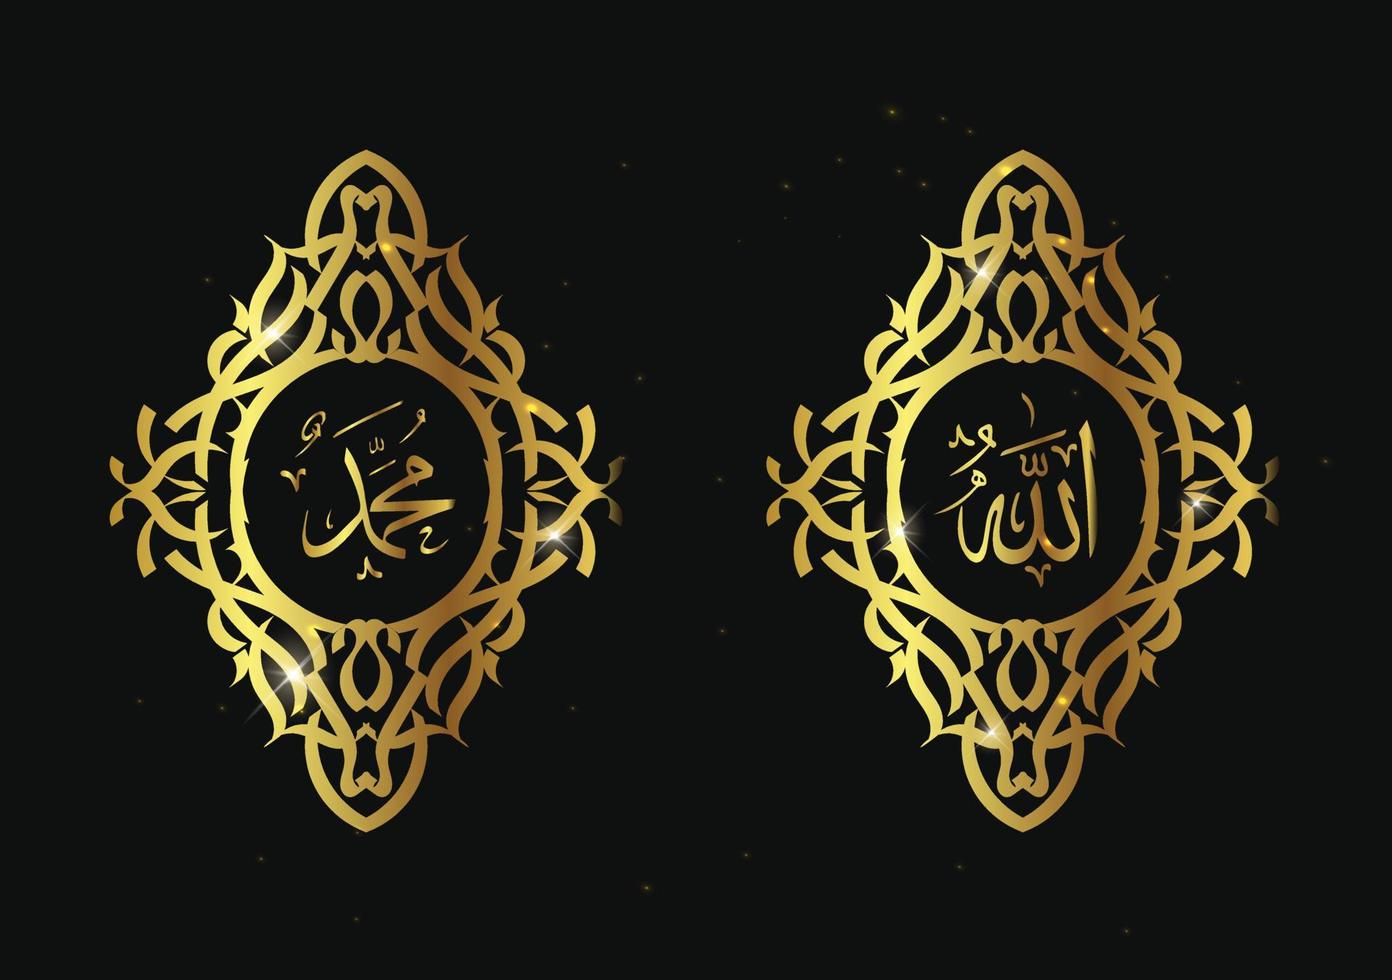 allah muhammad with vintage frame and gold color vector